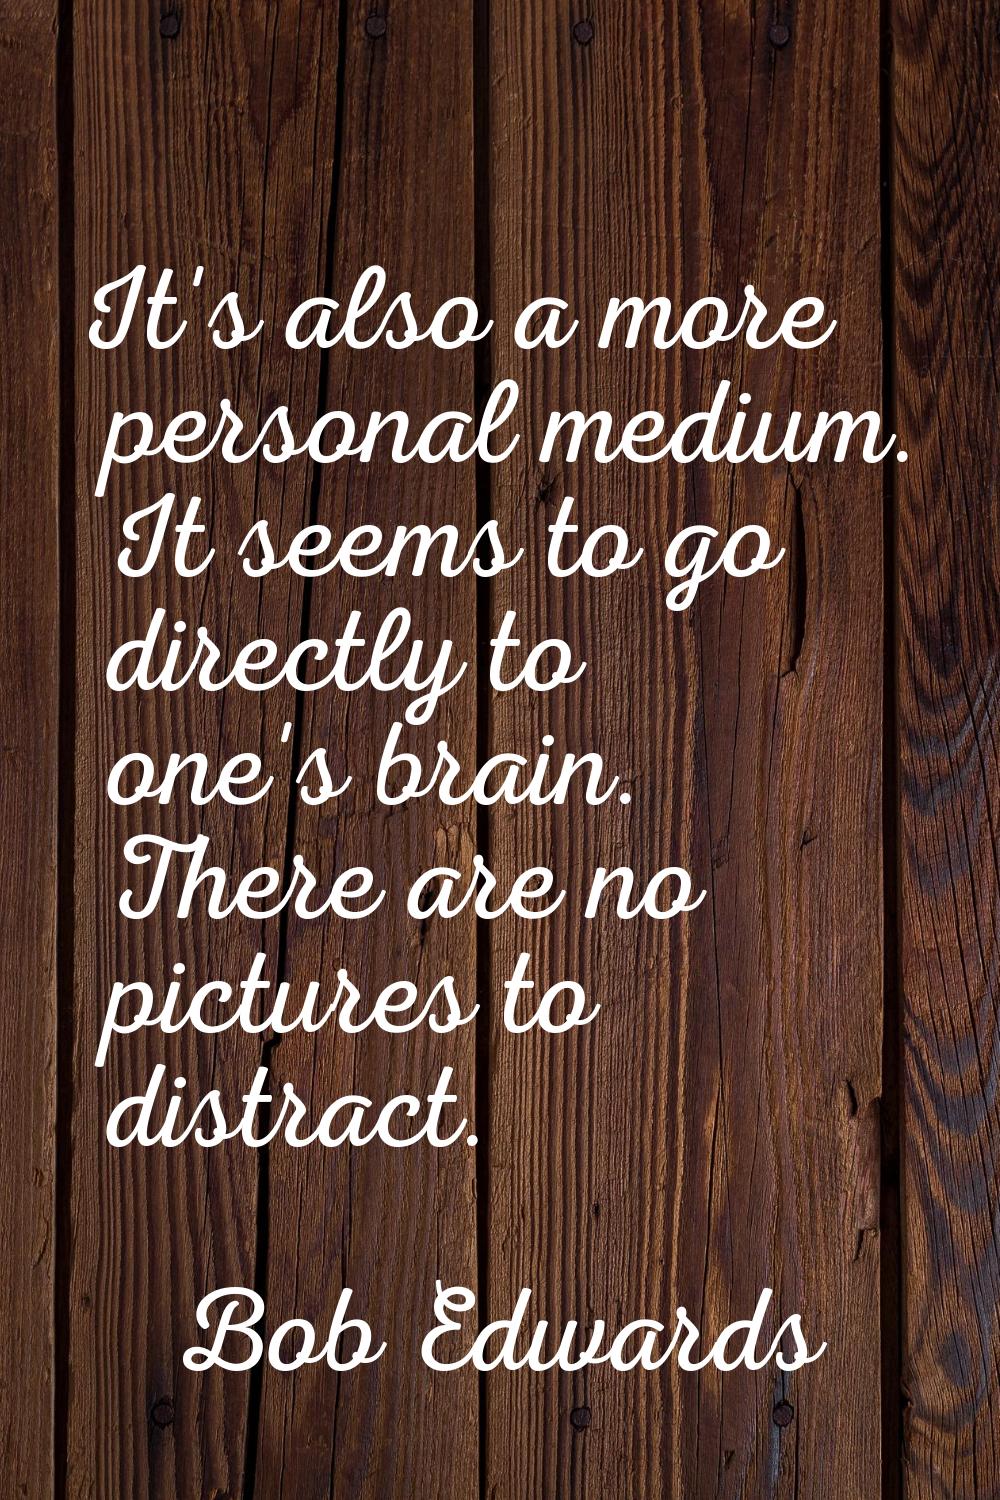 It's also a more personal medium. It seems to go directly to one's brain. There are no pictures to 